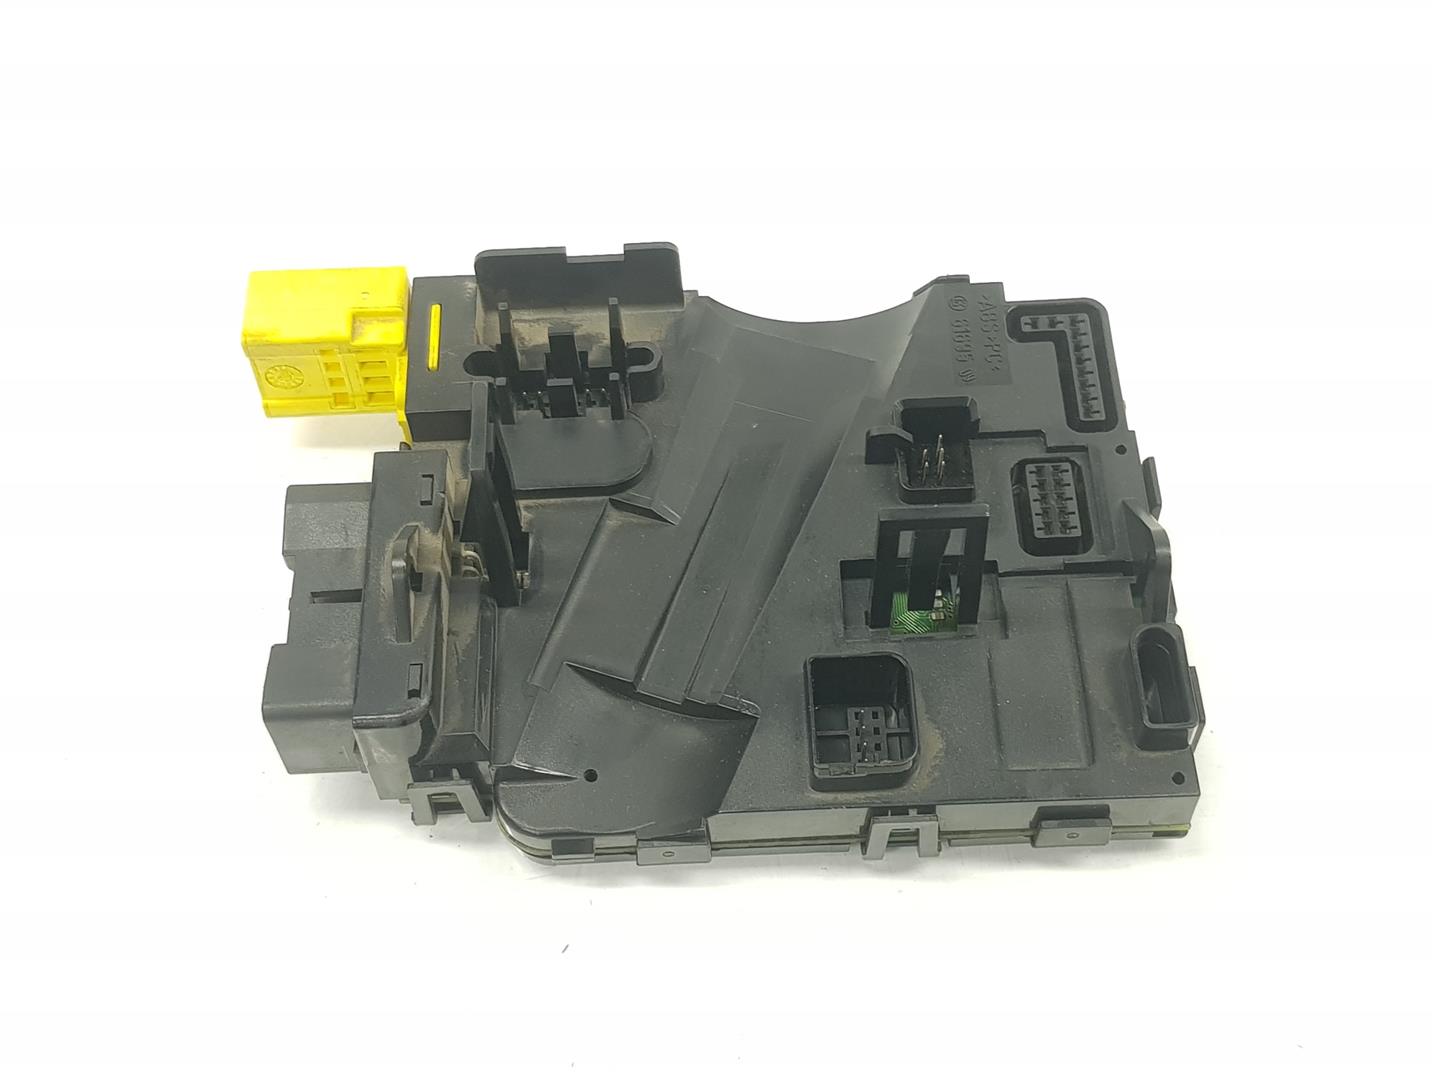 VOLKSWAGEN Caddy 3 generation (2004-2015) Other Control Units 1K0953549, 1K0953549 21078394